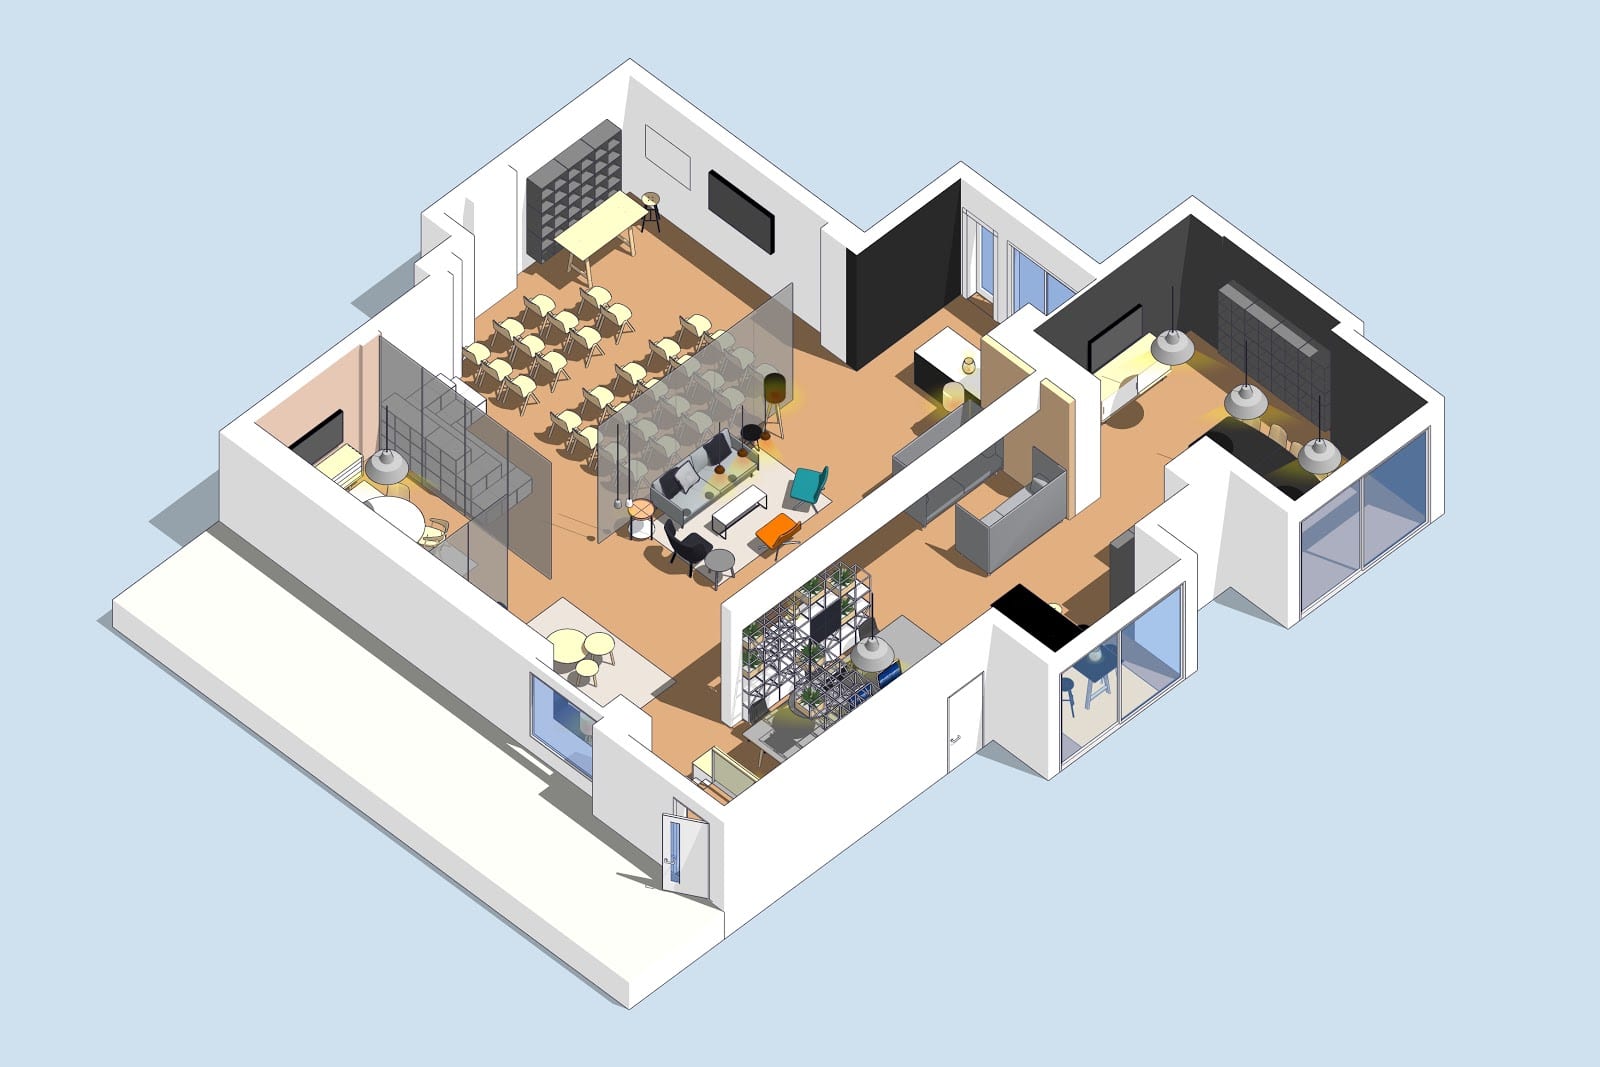 How to win interior design projects with SketchUp